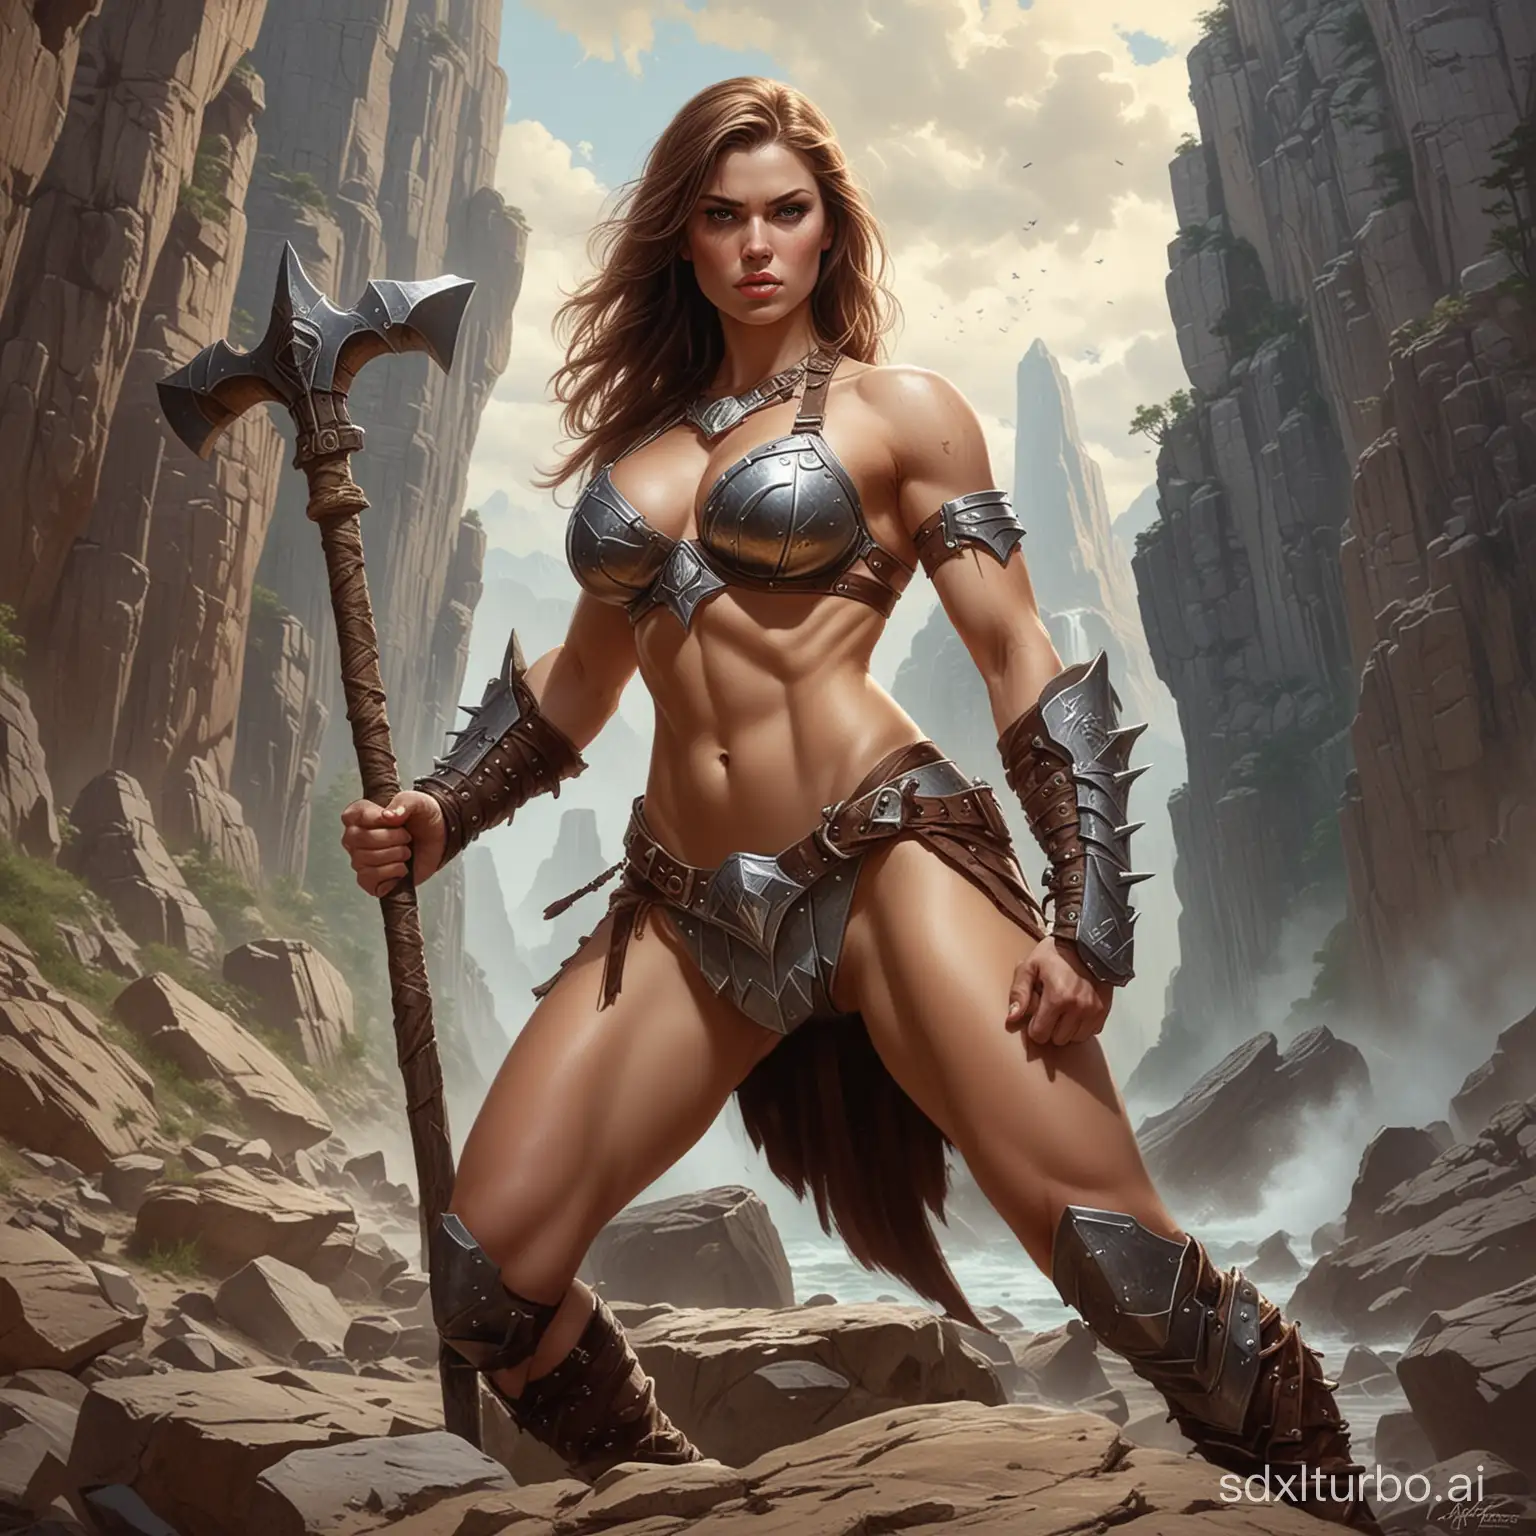 A striking berserker woman, 

swathed in bikini armor, 

firmly grips her hammer, 

poised atop a jagged rock, 

ever the emblem of a fearsome warrior invoking the essence of female barbarian chivalry as depicted by Tyler Edlin and Adrian Smith, 

a fusion of pin-up elegance and fantasy brutality, 

framed in a captivating portrait reminiscent of the works by Glenn Fabry's saga